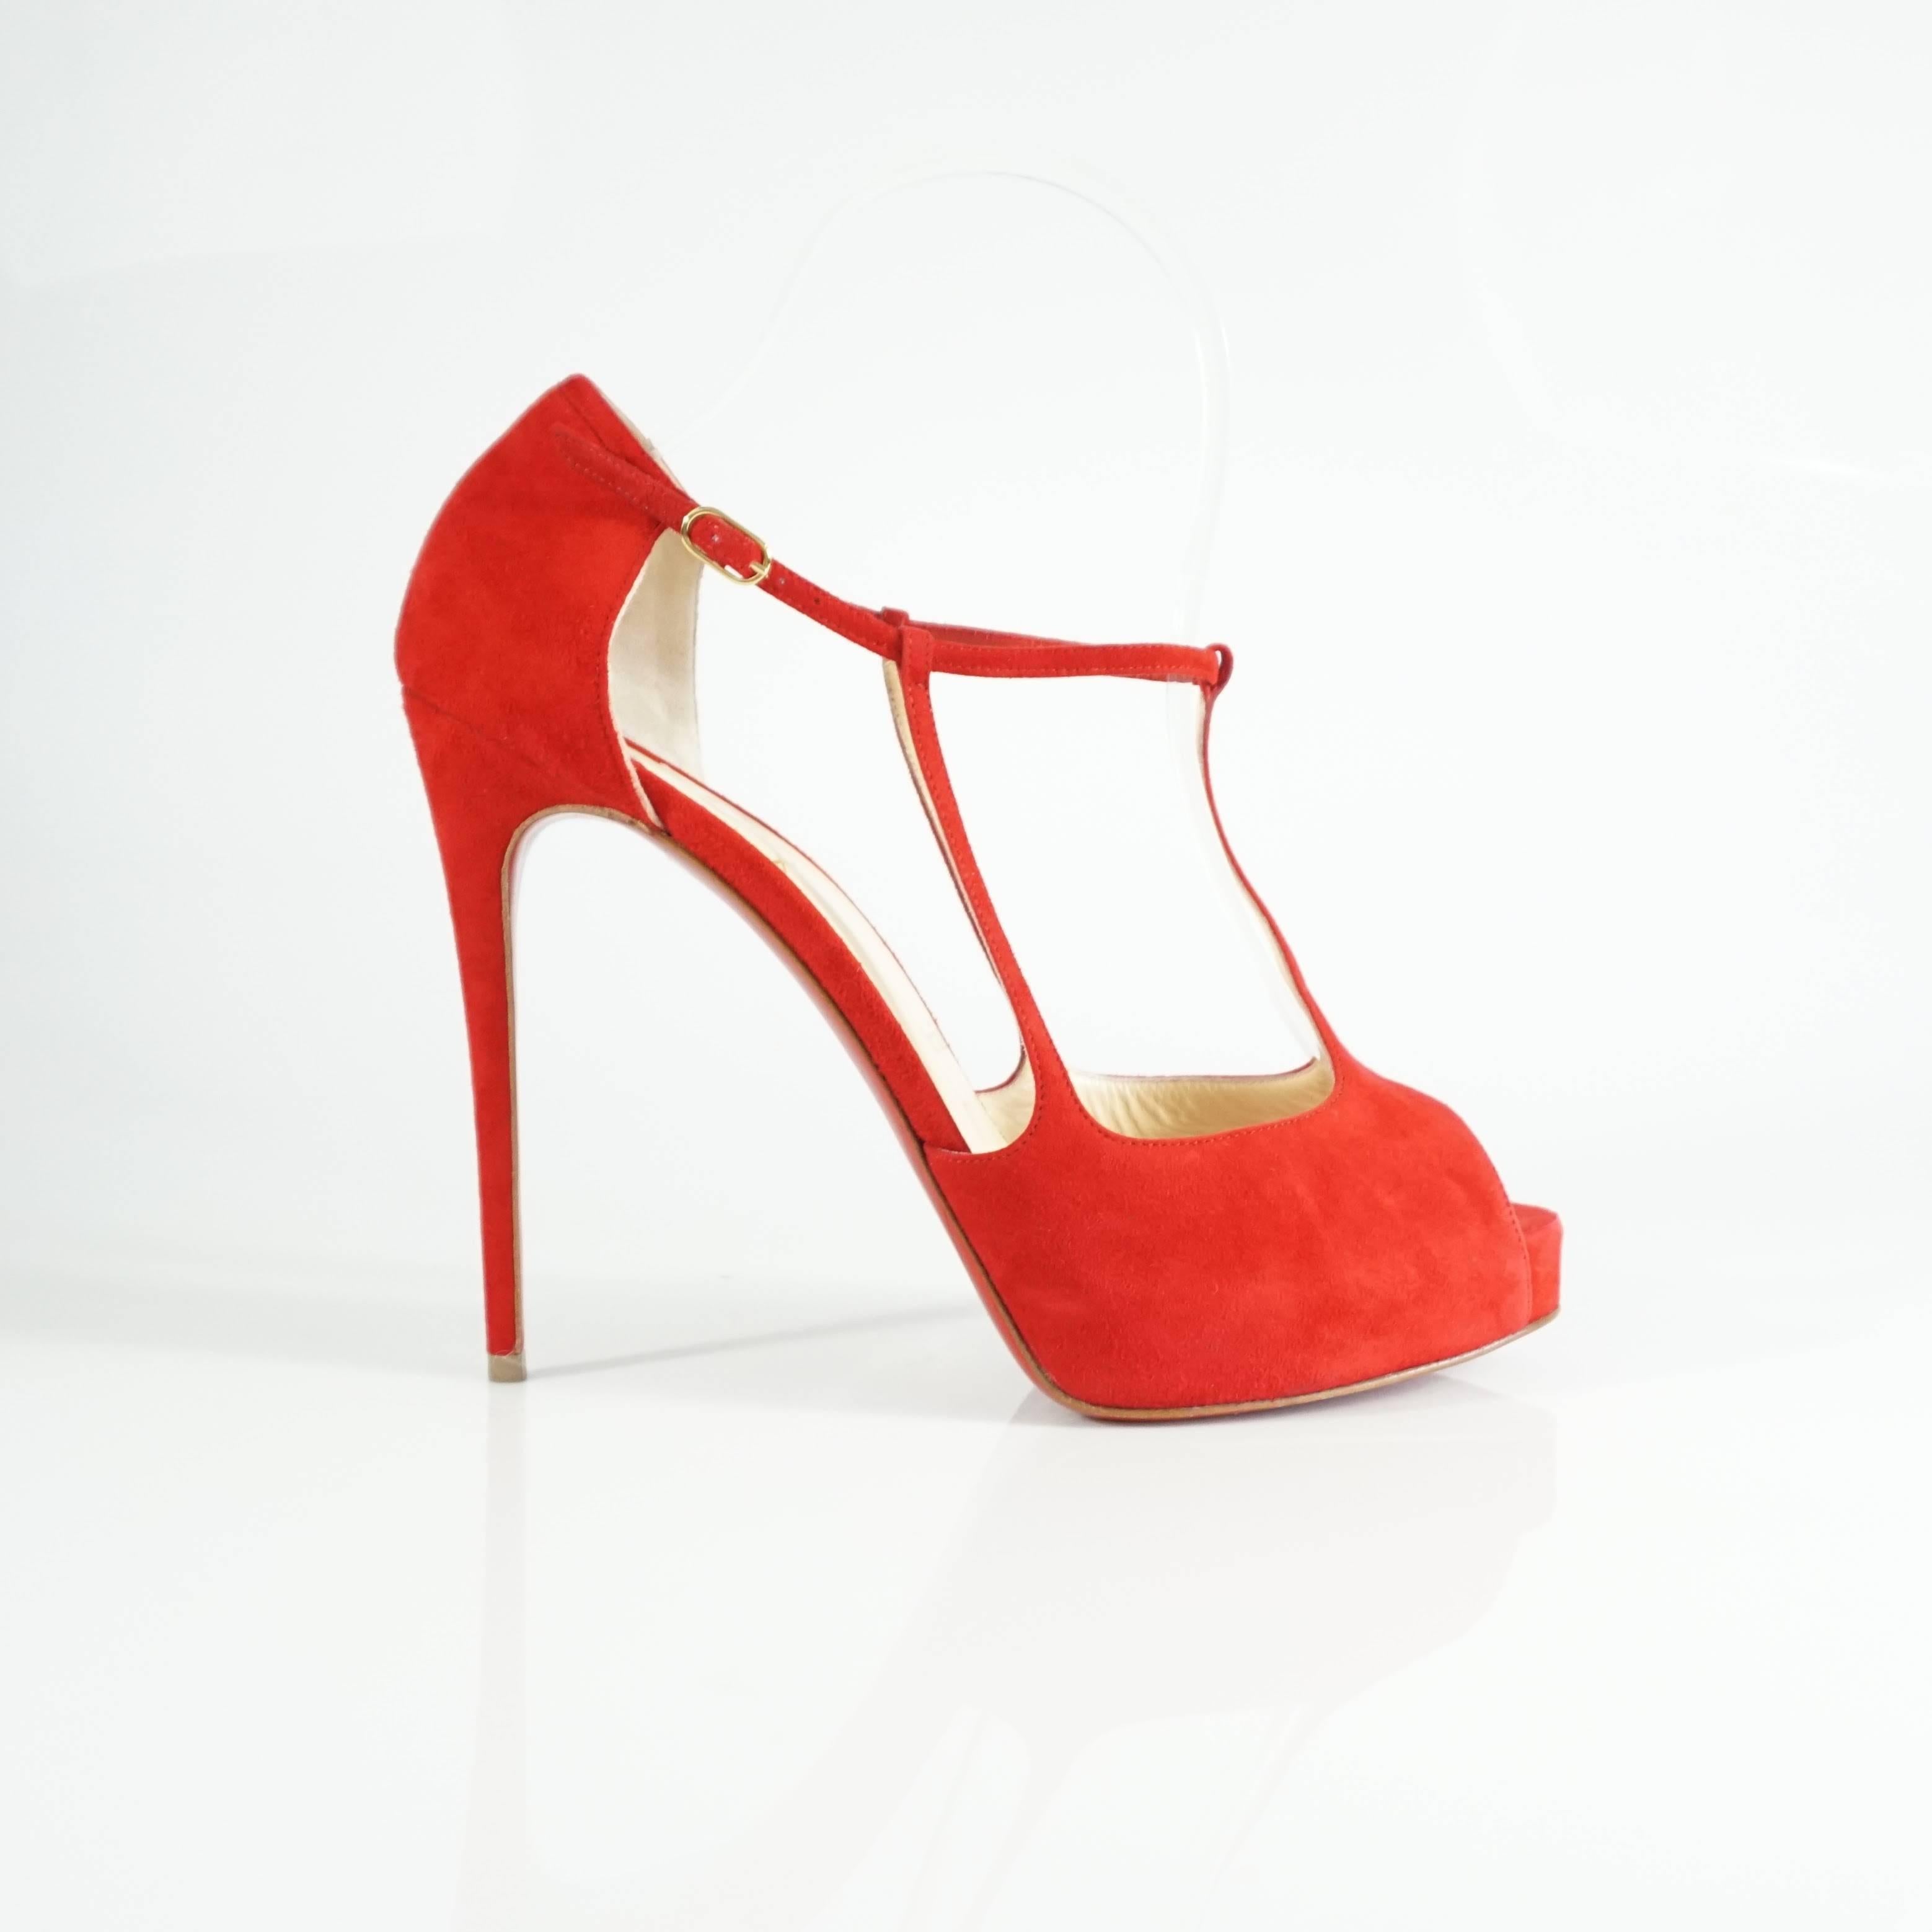 These Christian Louboutin heels are made of red suede. They are t-strap style with an additional strap on each side, a platform, and a stiletto heel. The shoes are in very good condition with minimal fabric wear, one area on the inside near the